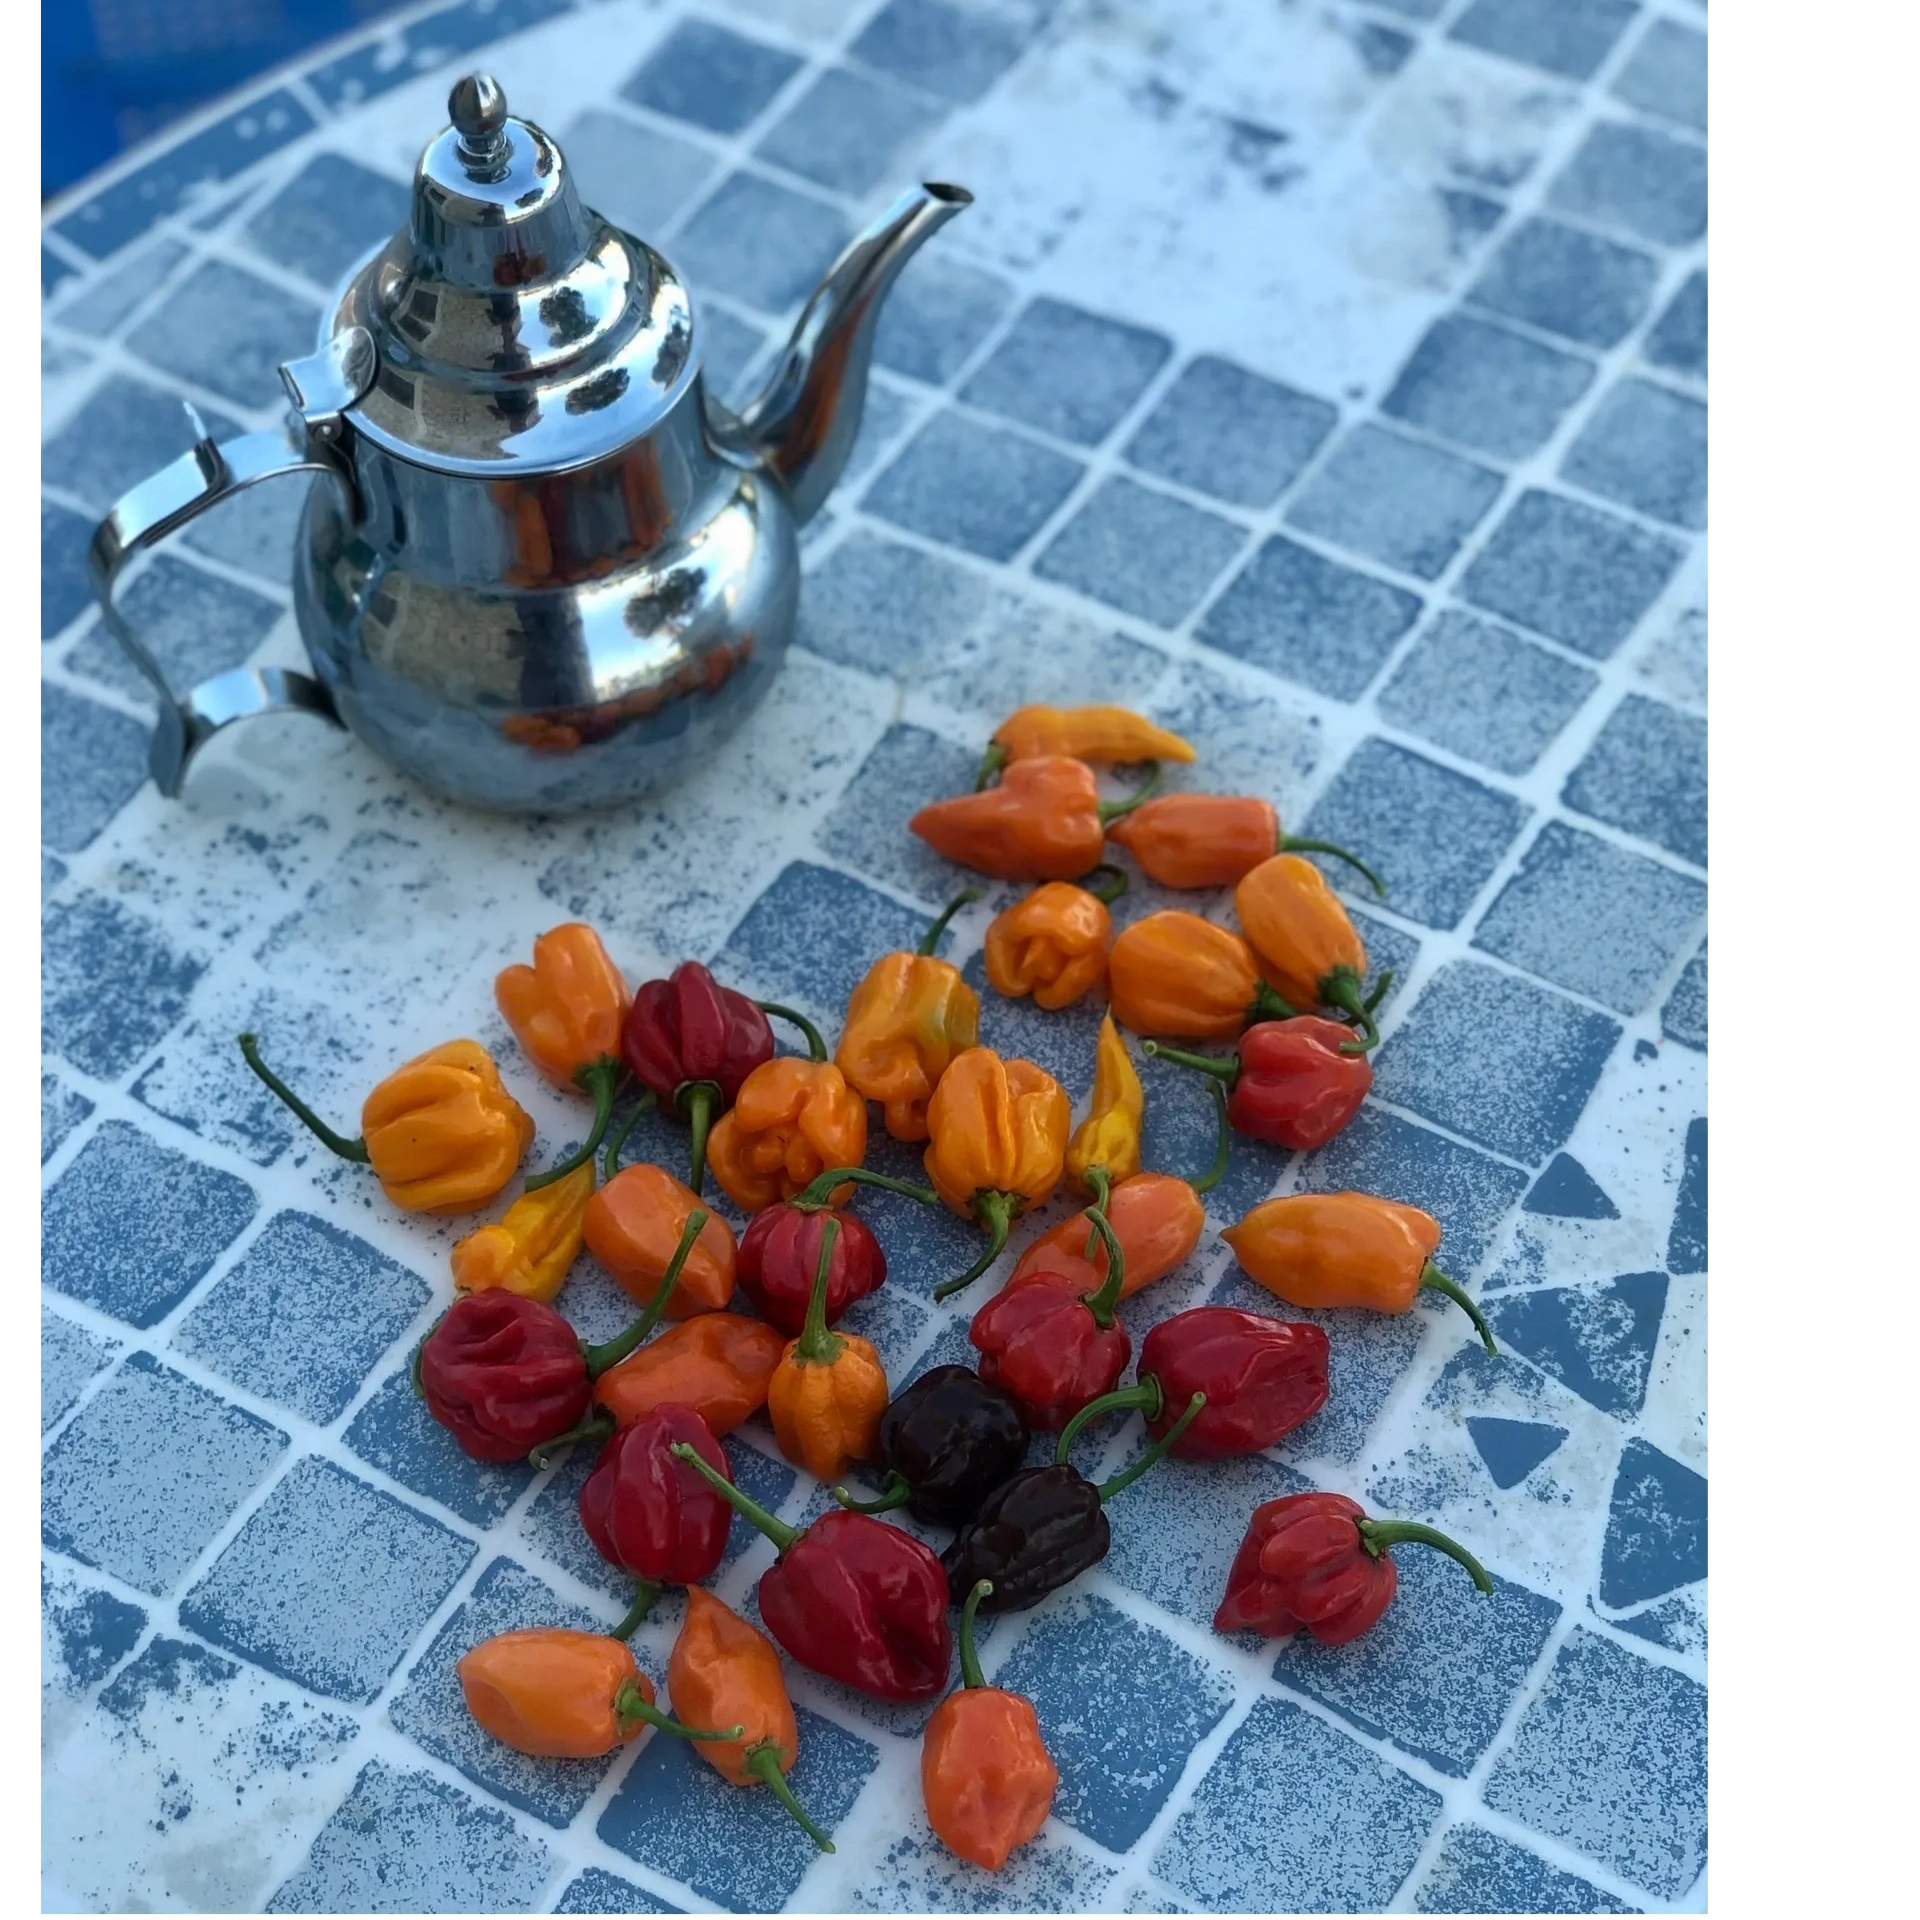 Organic habanero and ghost chili peppers growing in open fields in Morocco